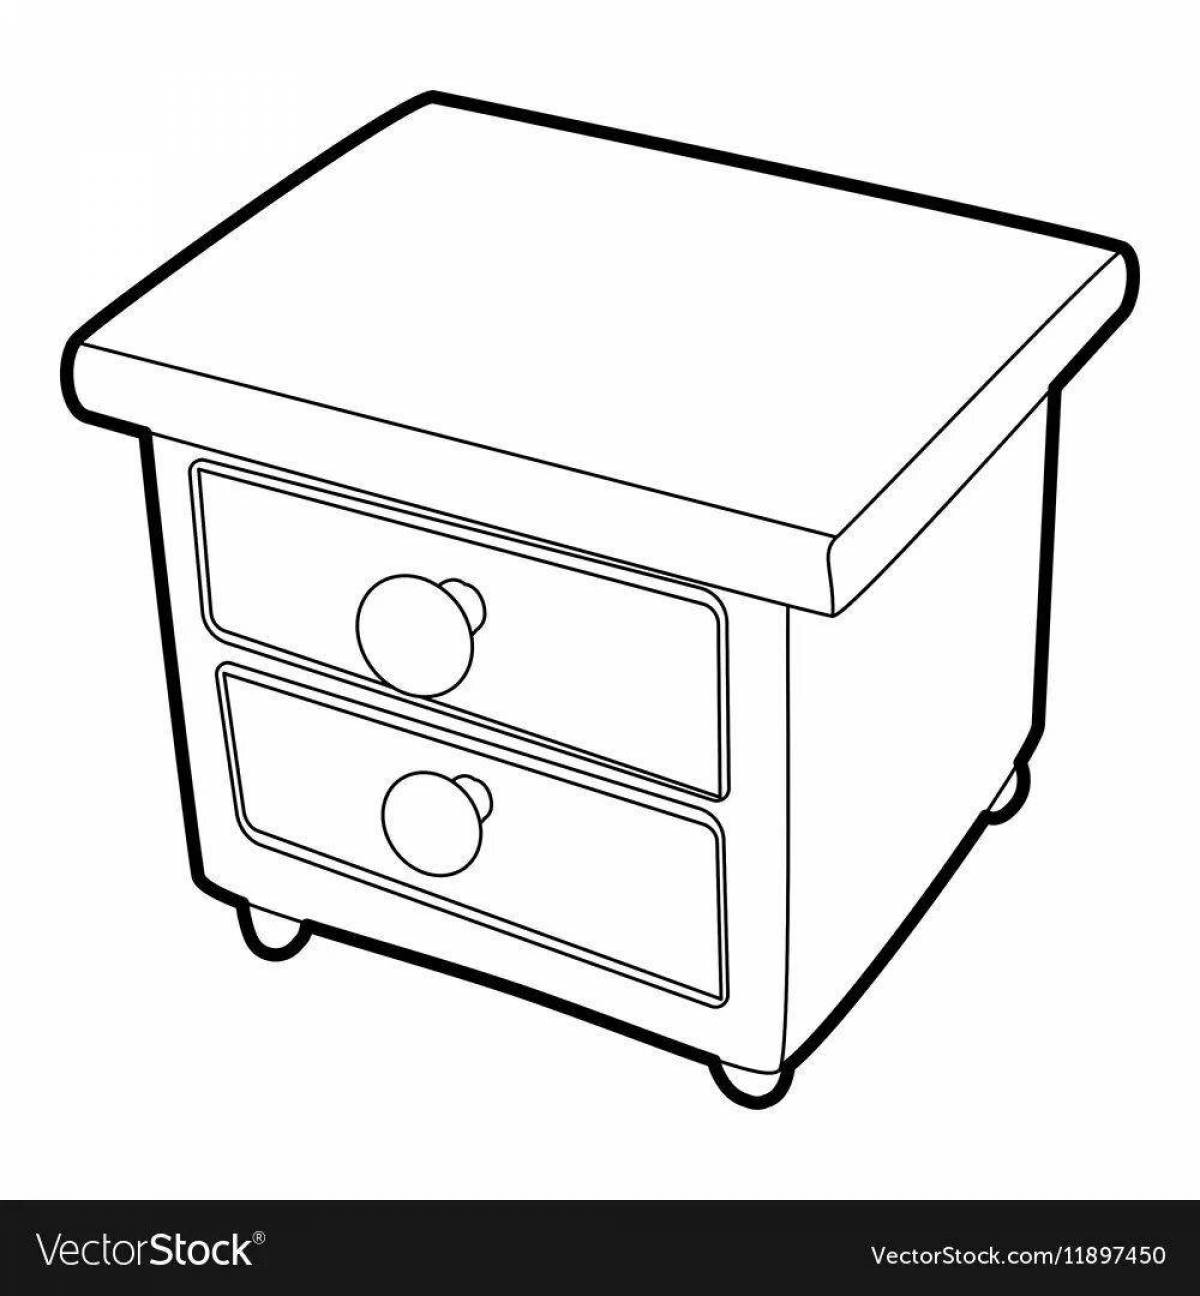 Bright nightstand coloring page